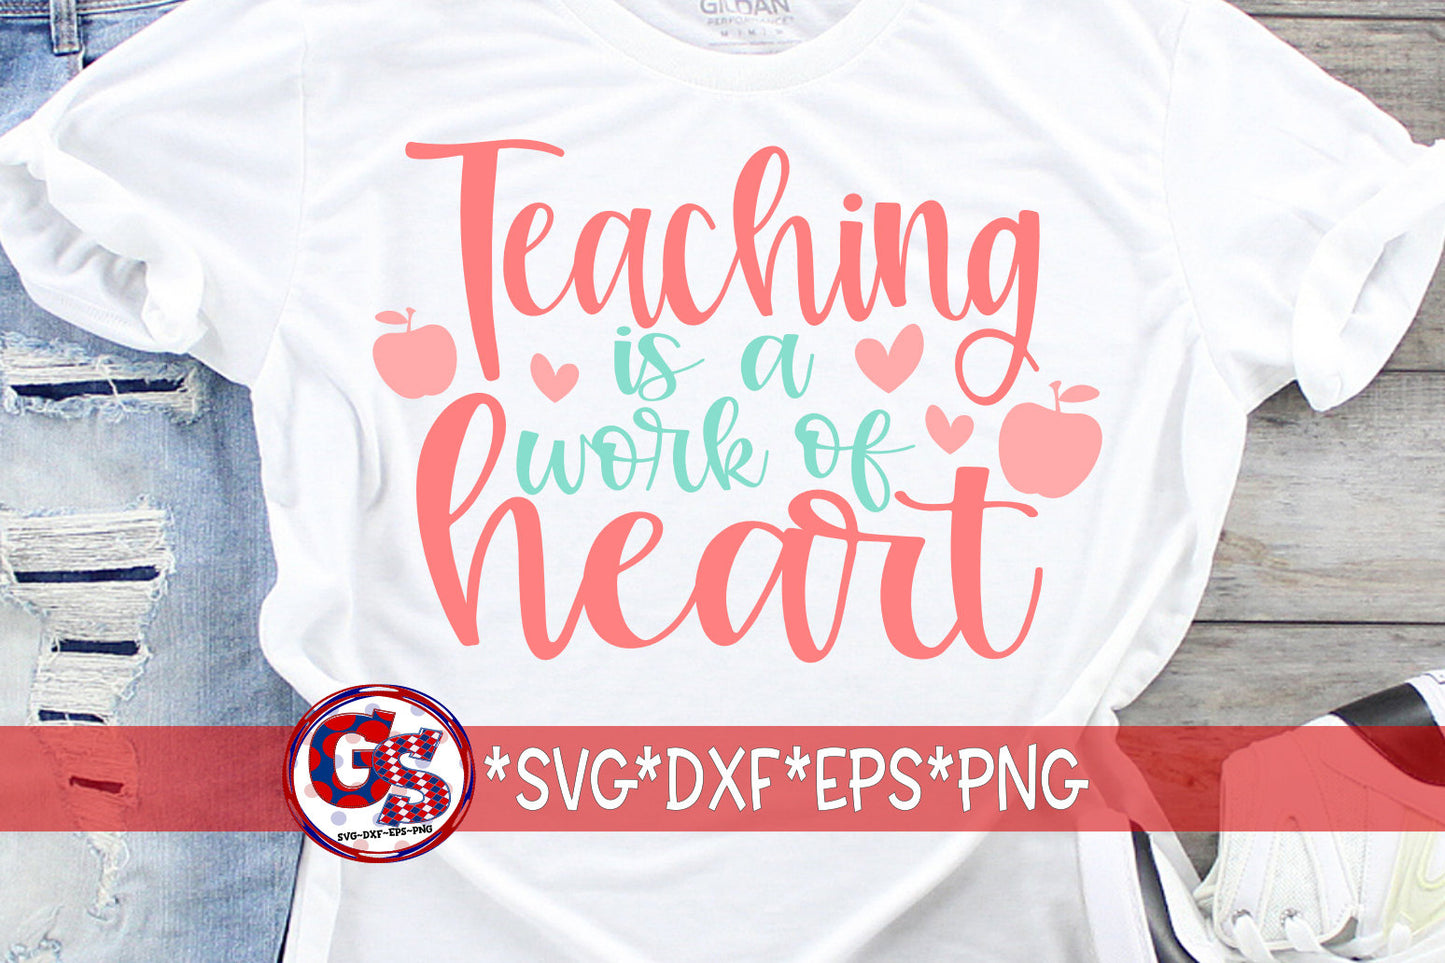 Teaching Is A Work Of Heart SvG | Valentine&#39;s Day SvG | Heart SvG | Teacher SvG | Valentine&#39;s Day SvG | Teach Svg  Instant Download Cut File